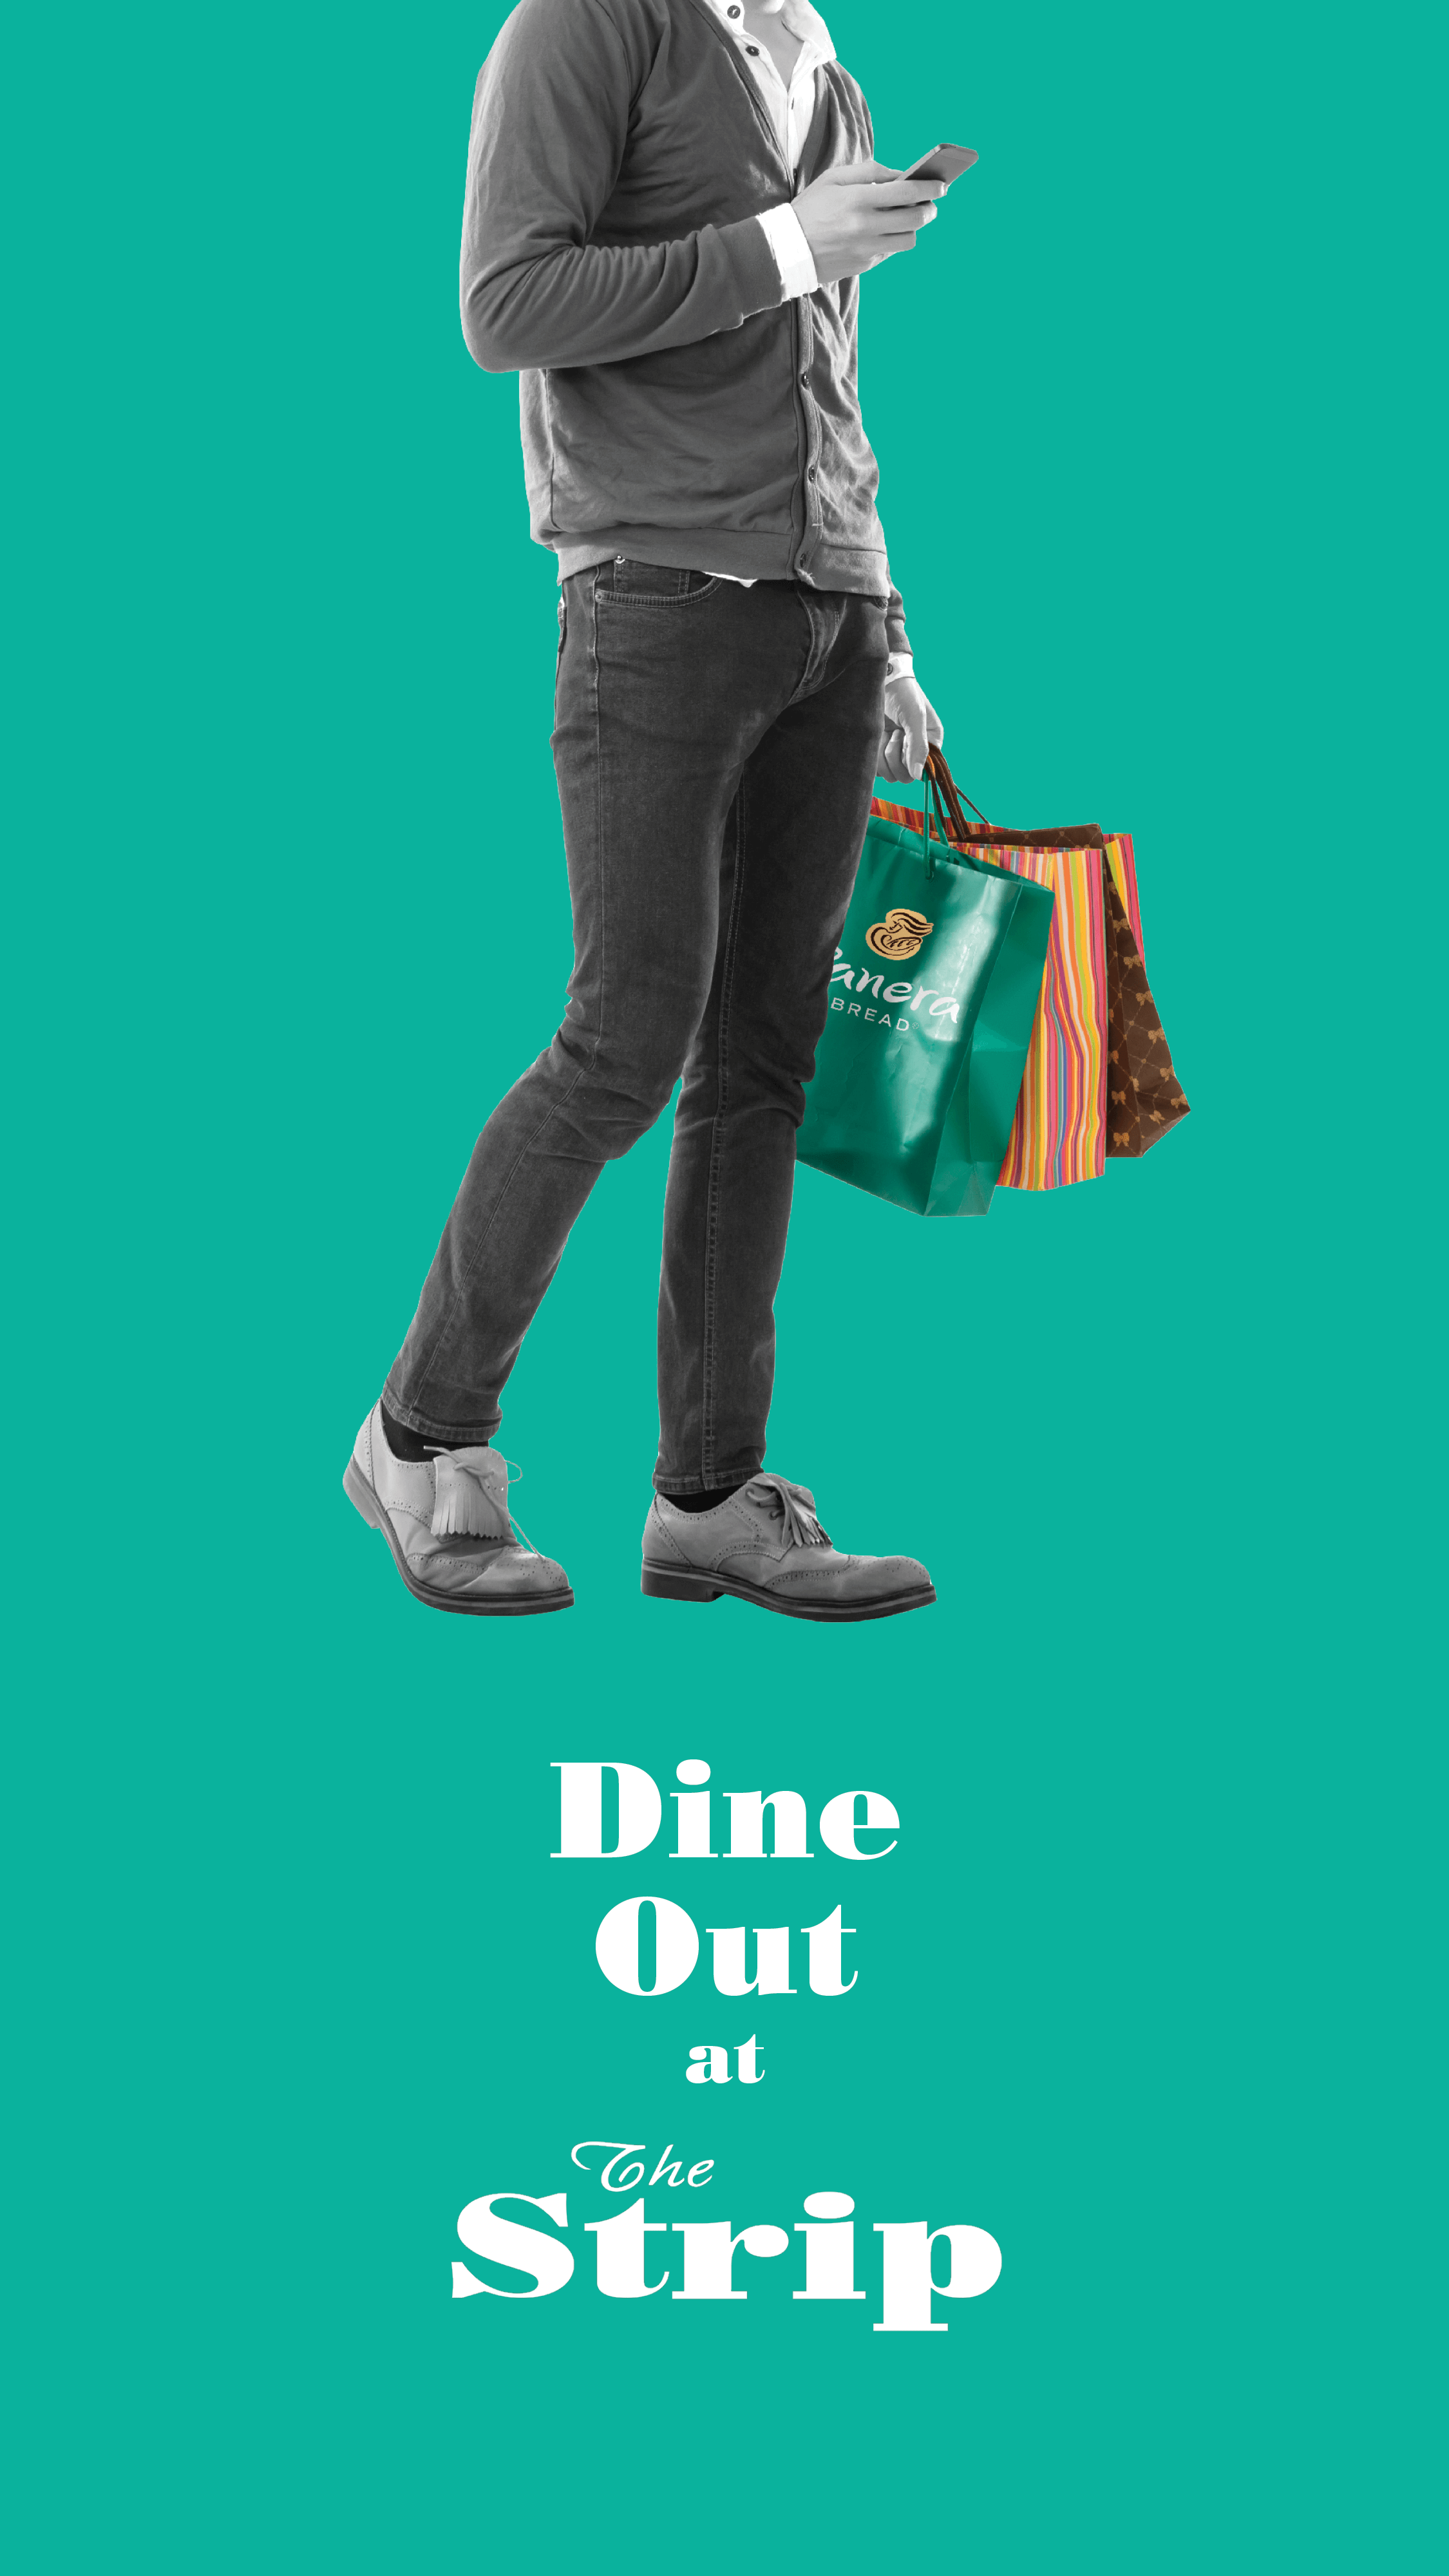 Dine Out at The Strip